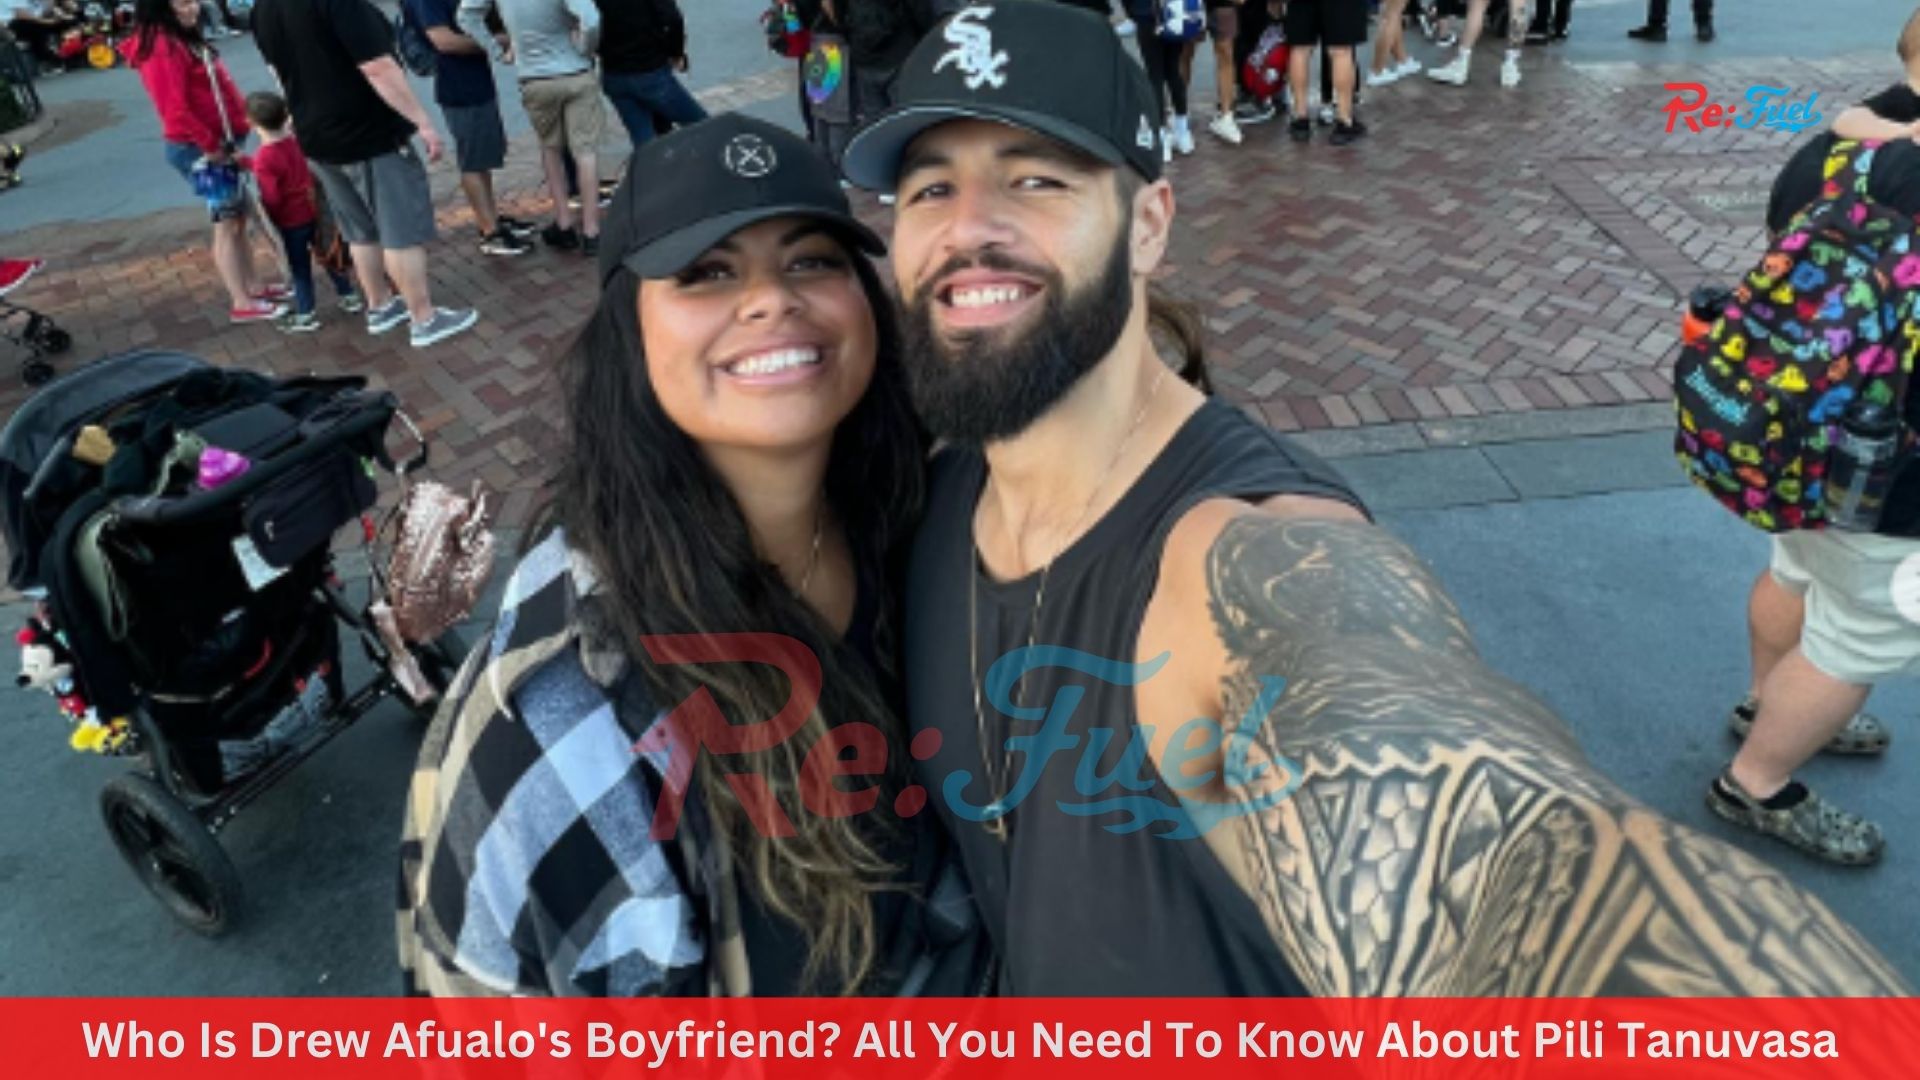 Who Is Drew Afualo's Boyfriend? All You Need To Know About Pili Tanuvasa